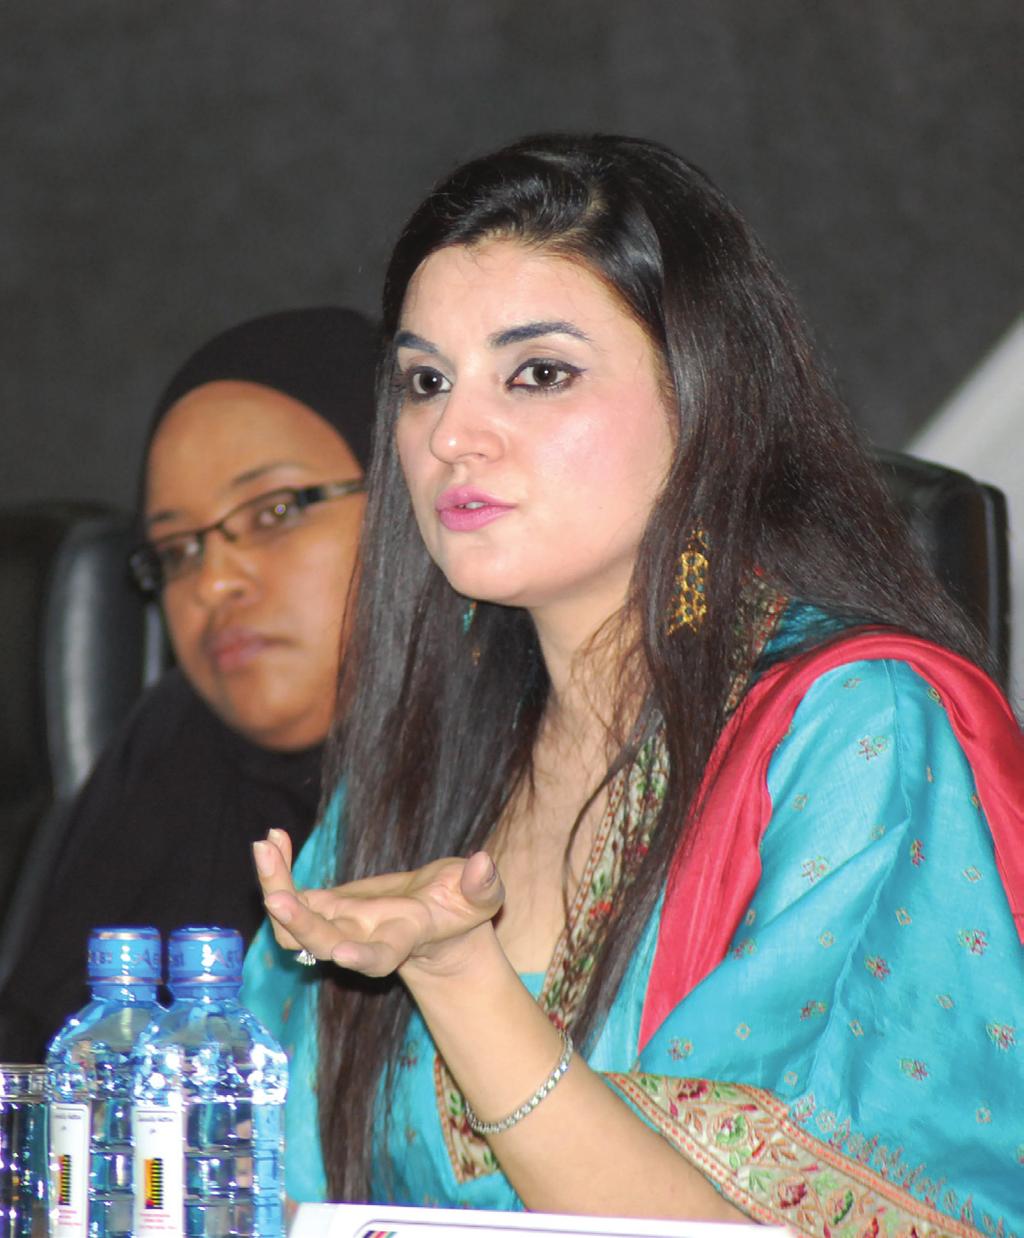 The former Chairperson of the CWP, Ms Kashmala Tariq, MNA, of Pakistan (right) speaking in Kenya in 2010. Parliamentarians held at the 35th Commonwealth Parliamentary Conference in Barbados in 1989.